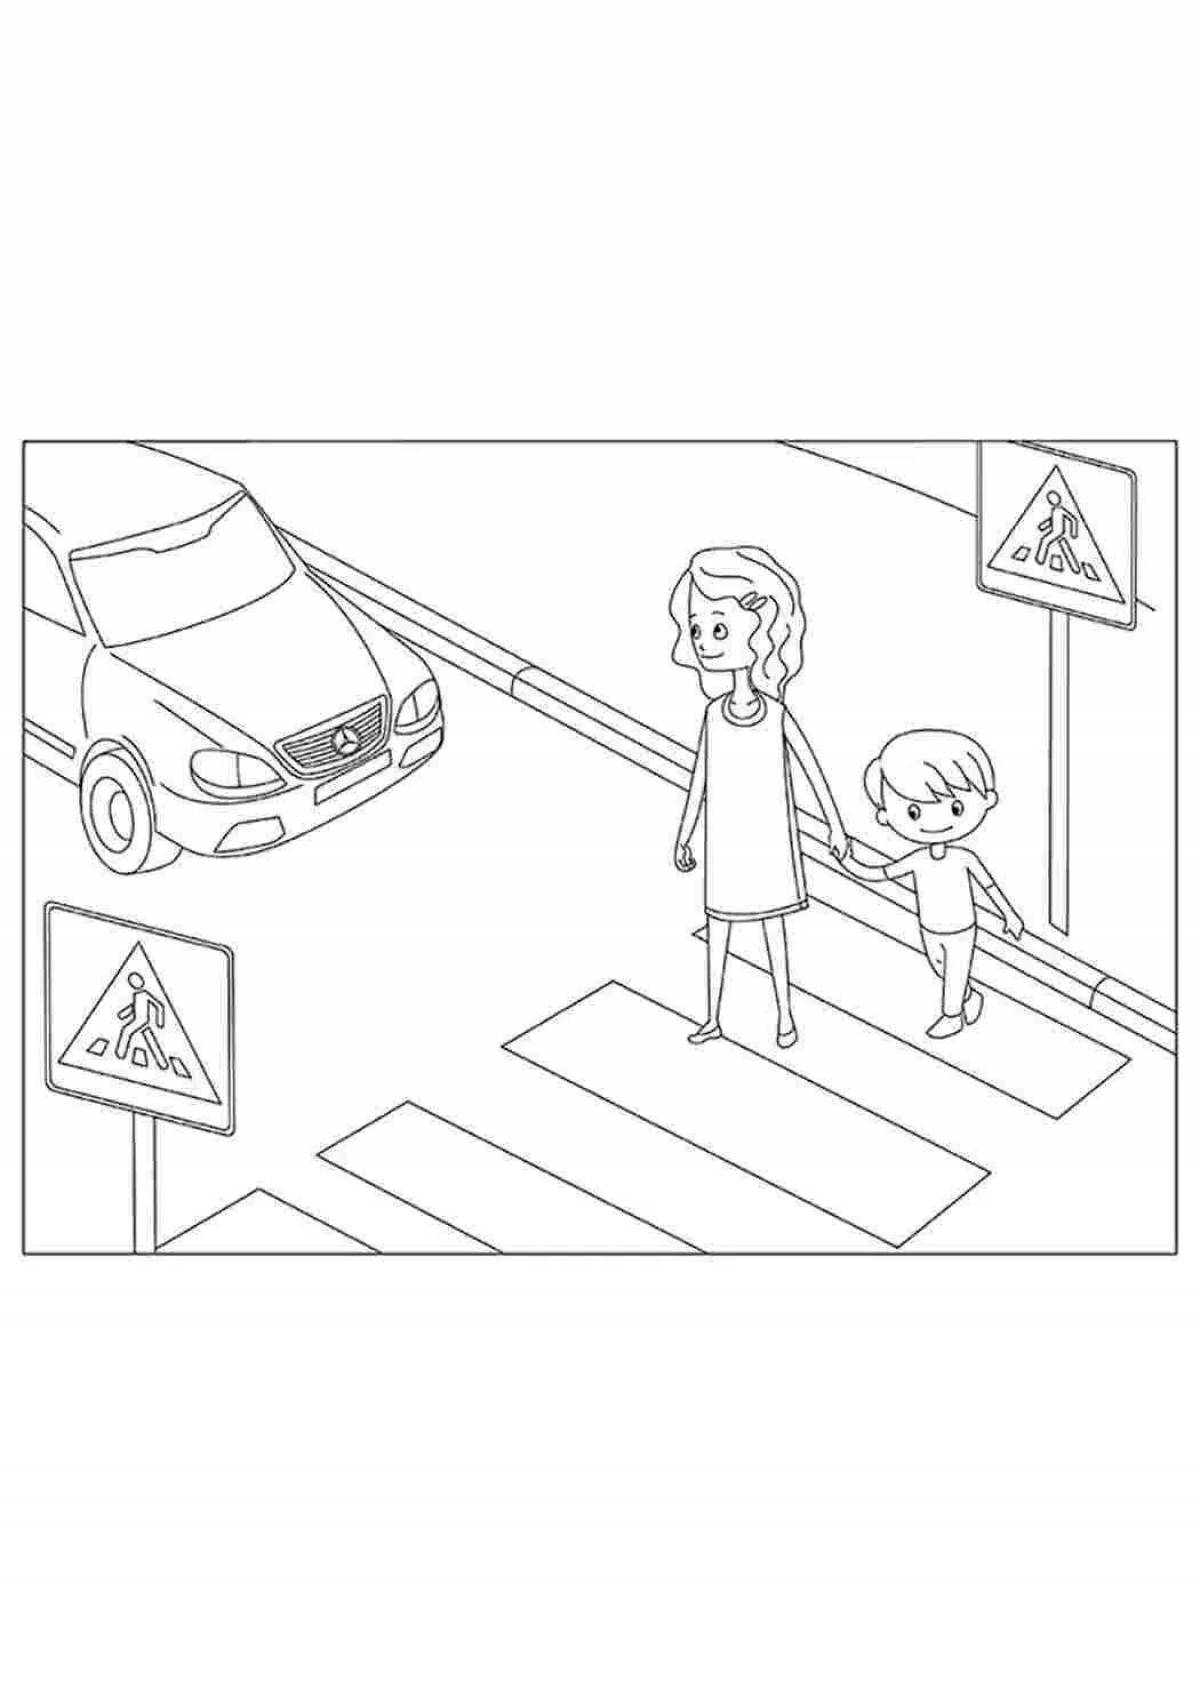 Colorful traffic rules coloring book for schoolchildren